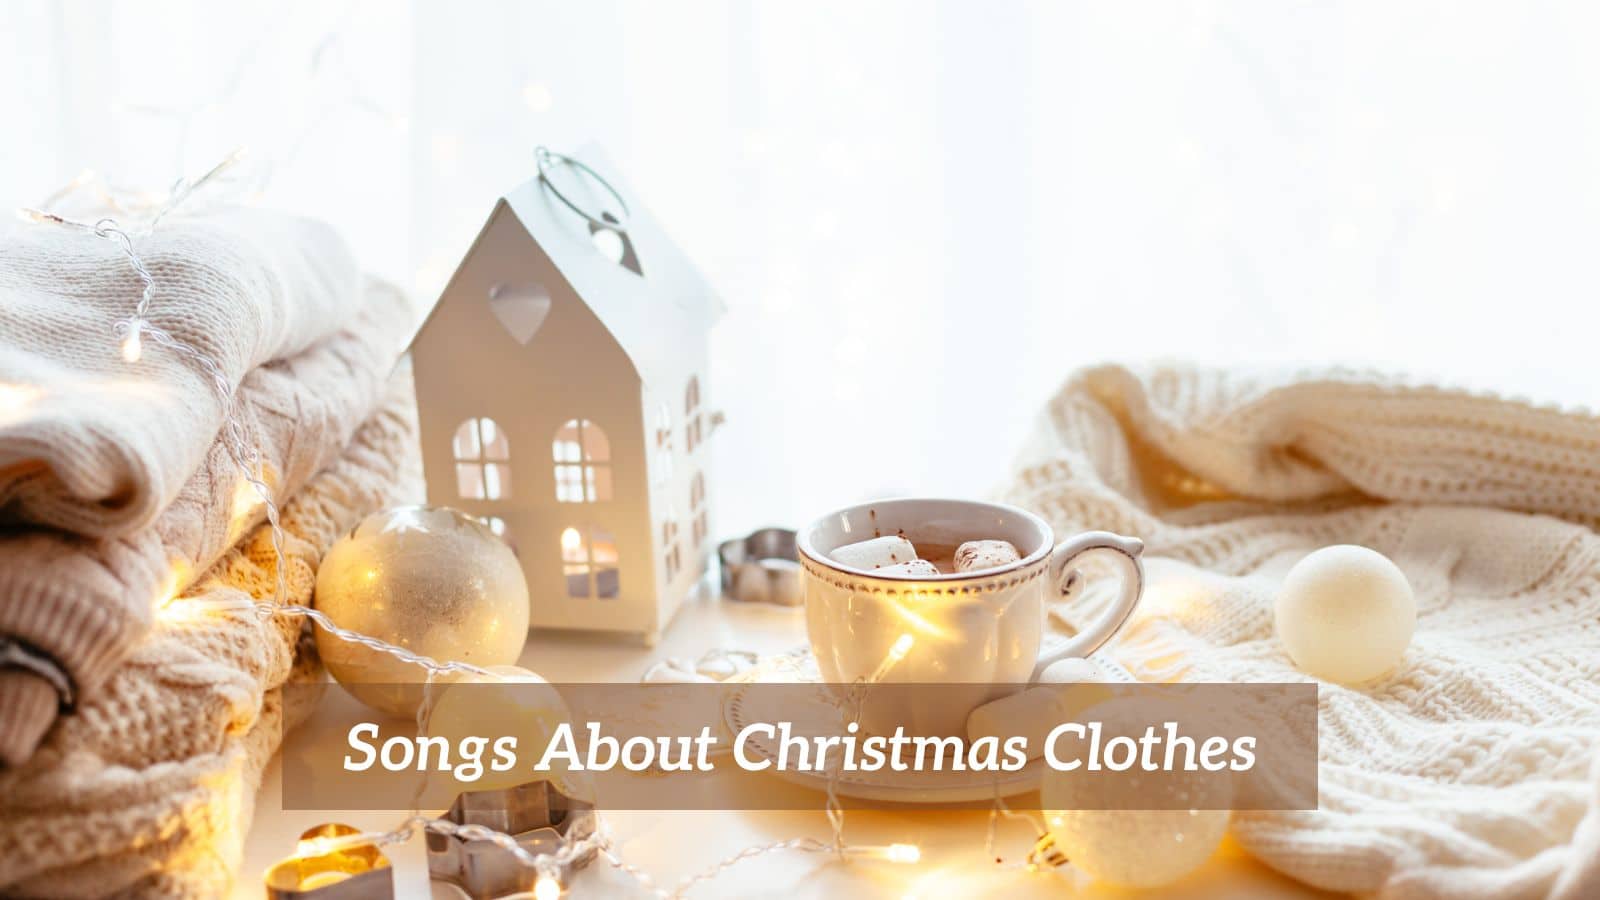 Songs About Christmas Clothes